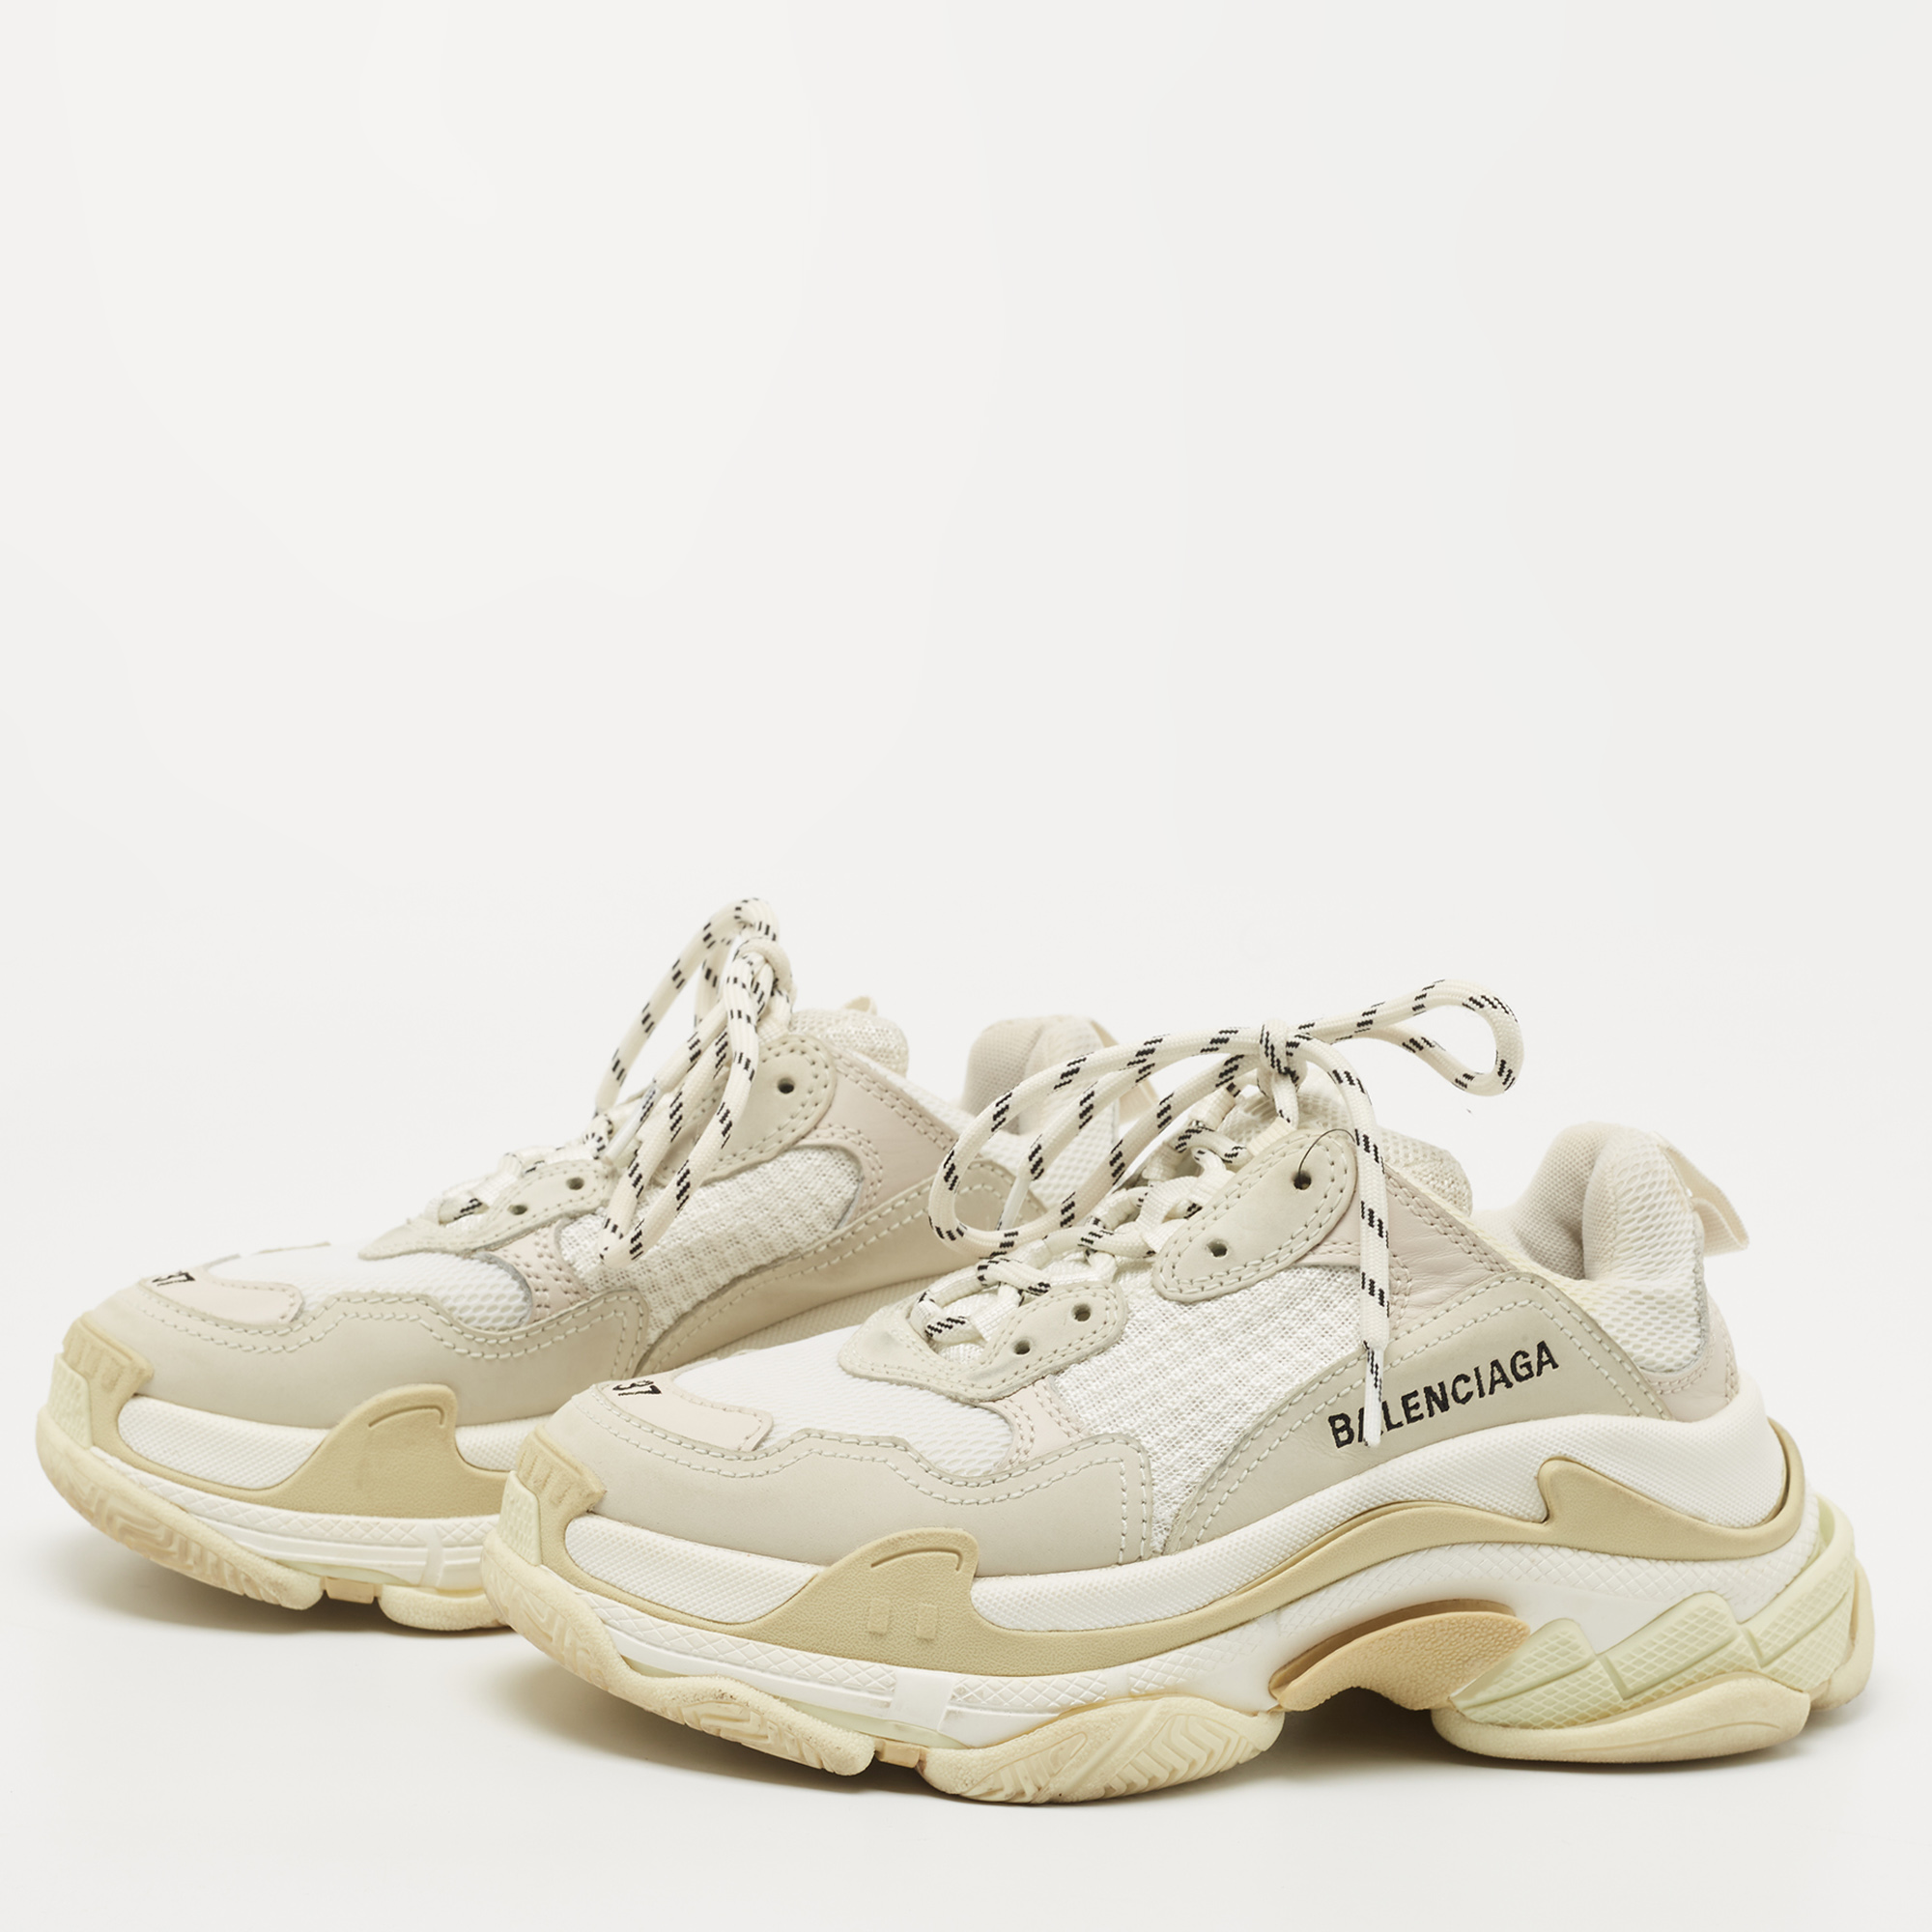 

Balenciaga Tricolor Mesh and Leather Triple S Sneakers Size, White